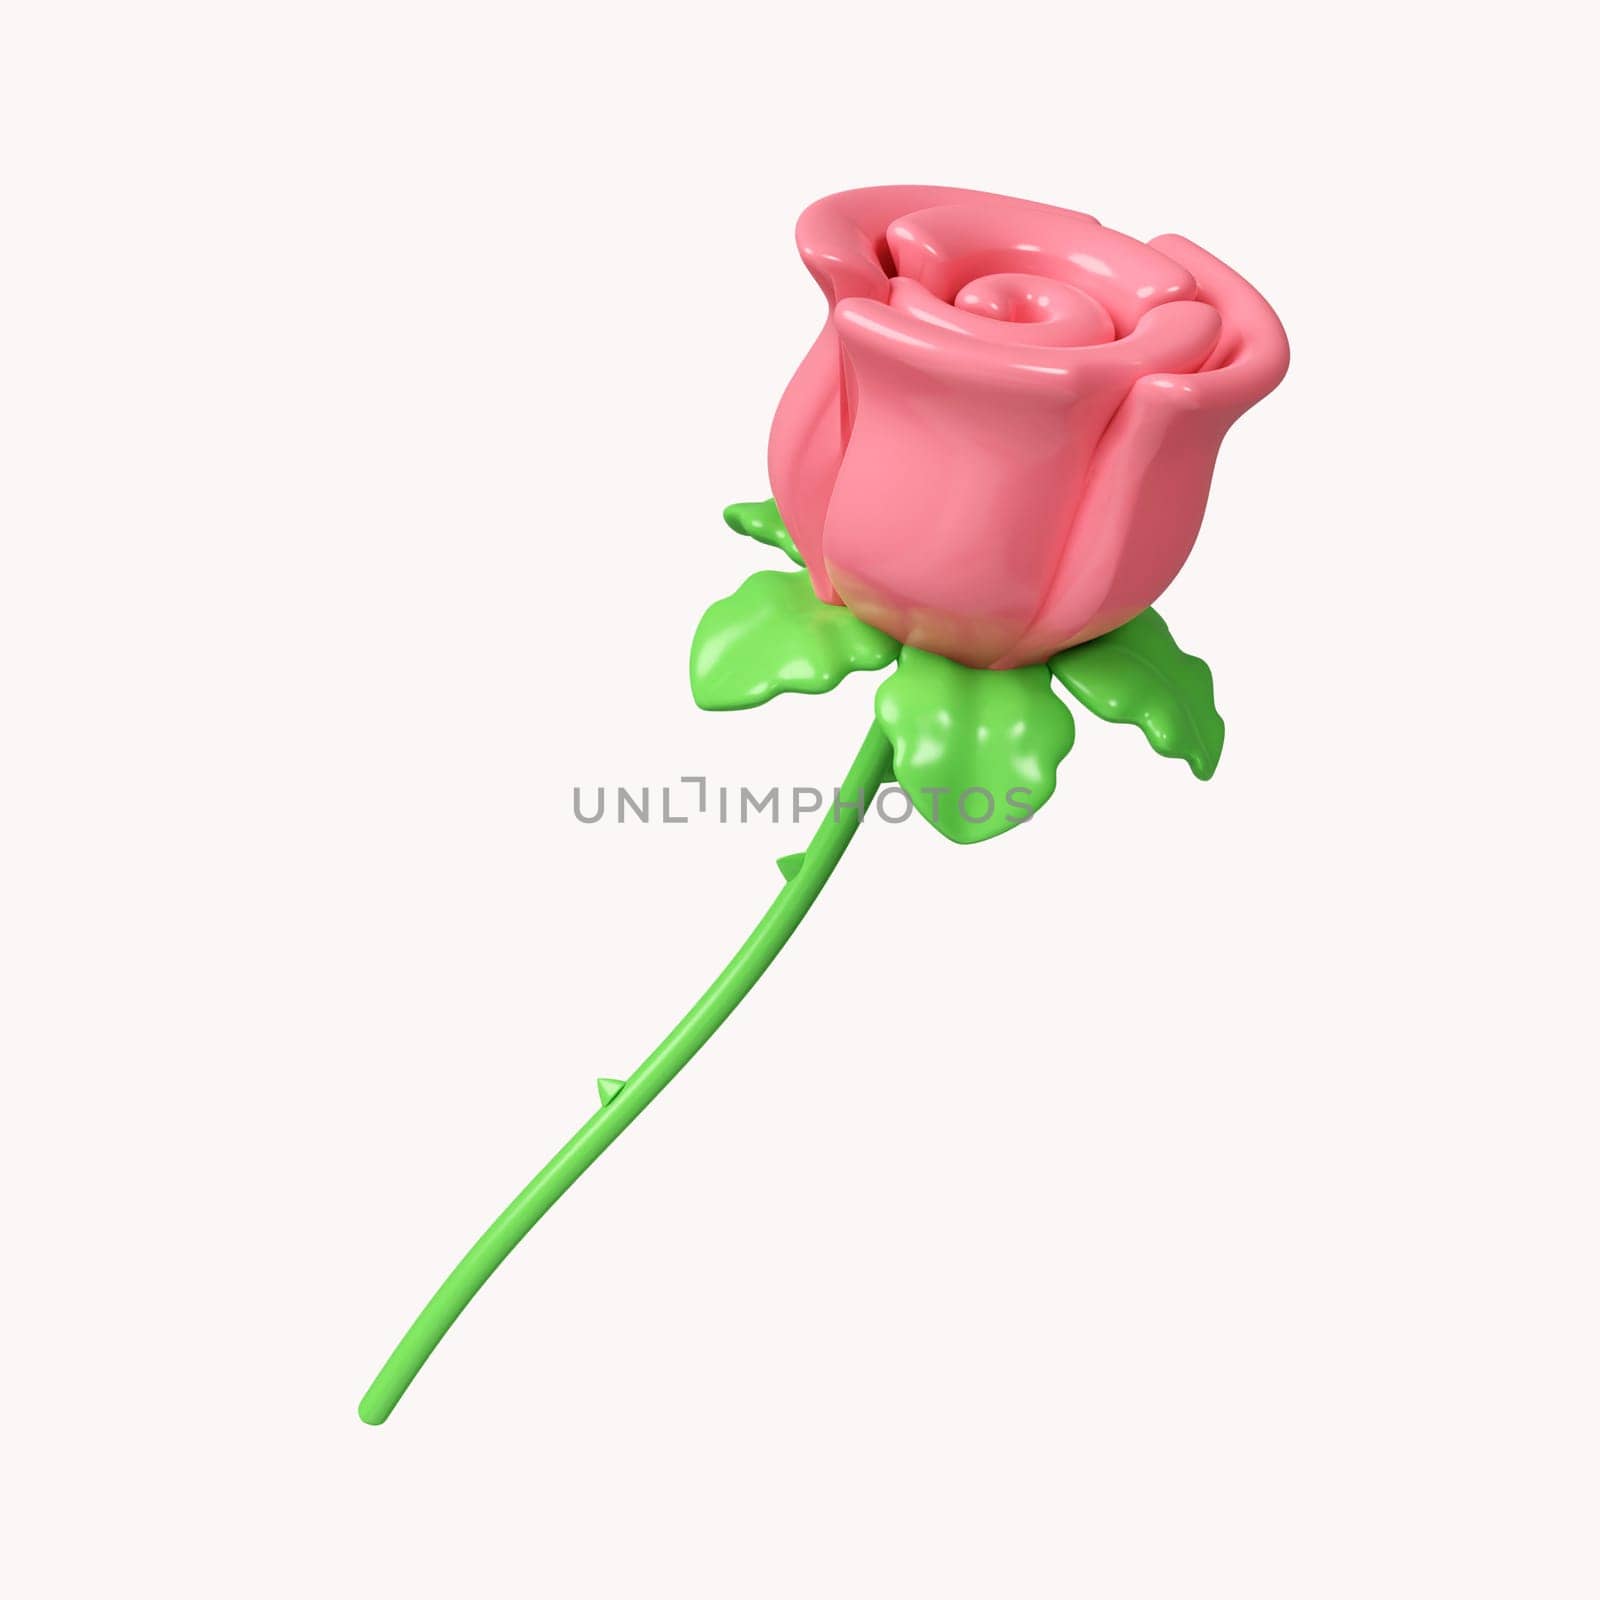 3d Rose flowers .icon isolated on white background. 3d rendering illustration. Clipping path..